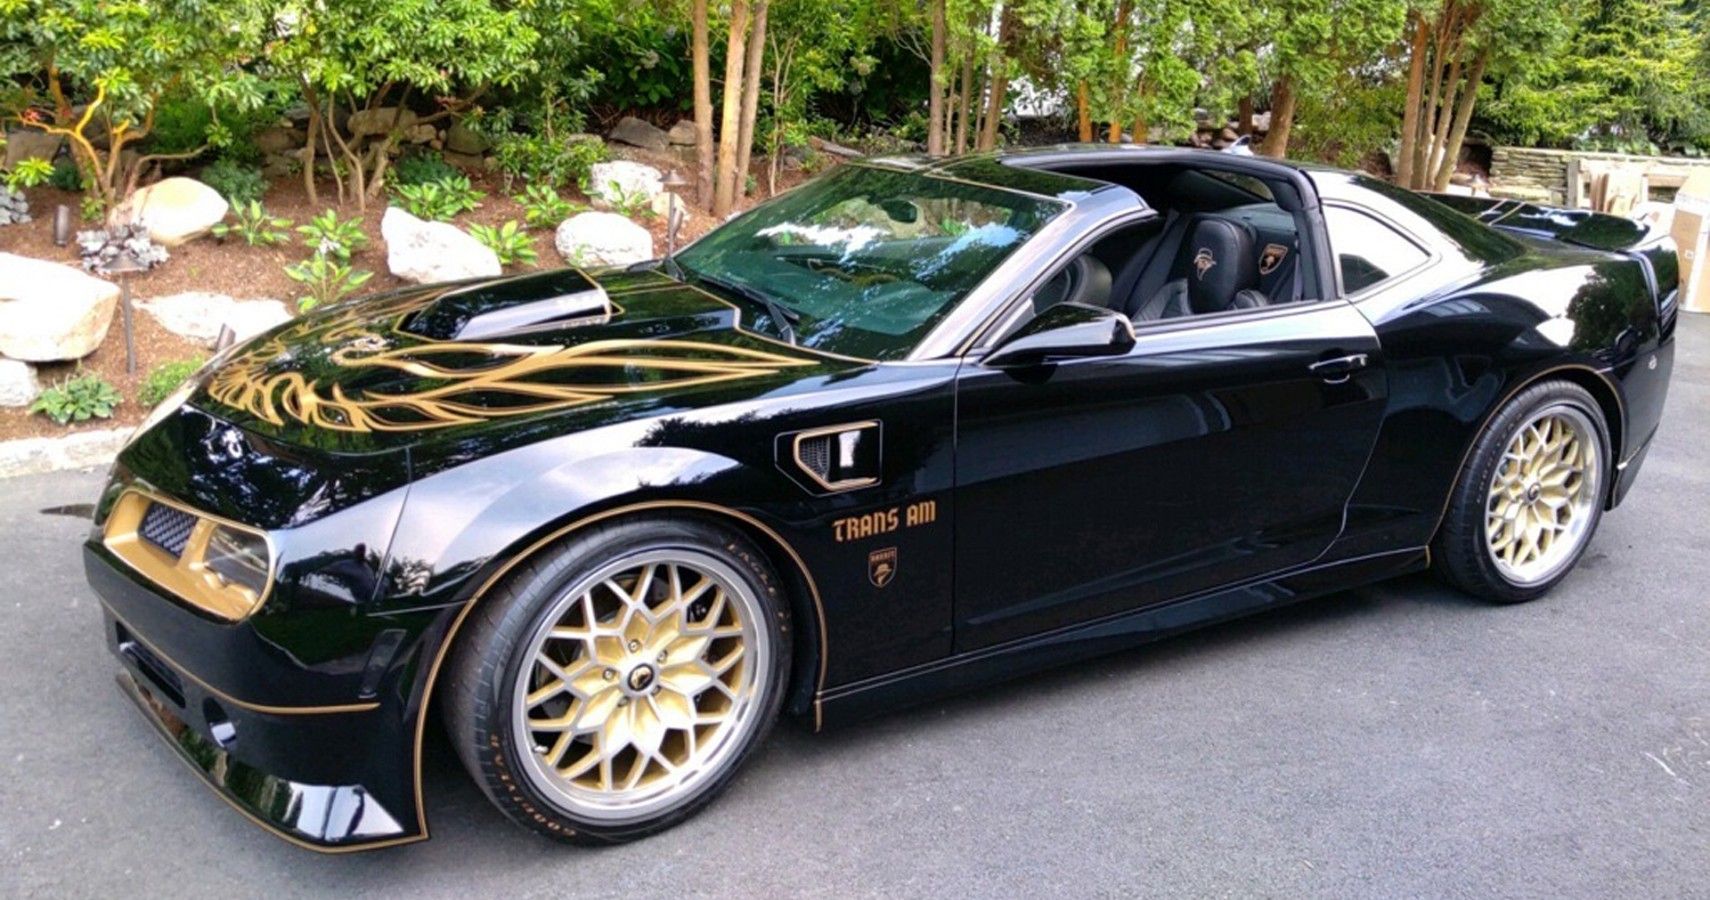 9 Things To Know About The Bandit Edition Pontiac Trans Am